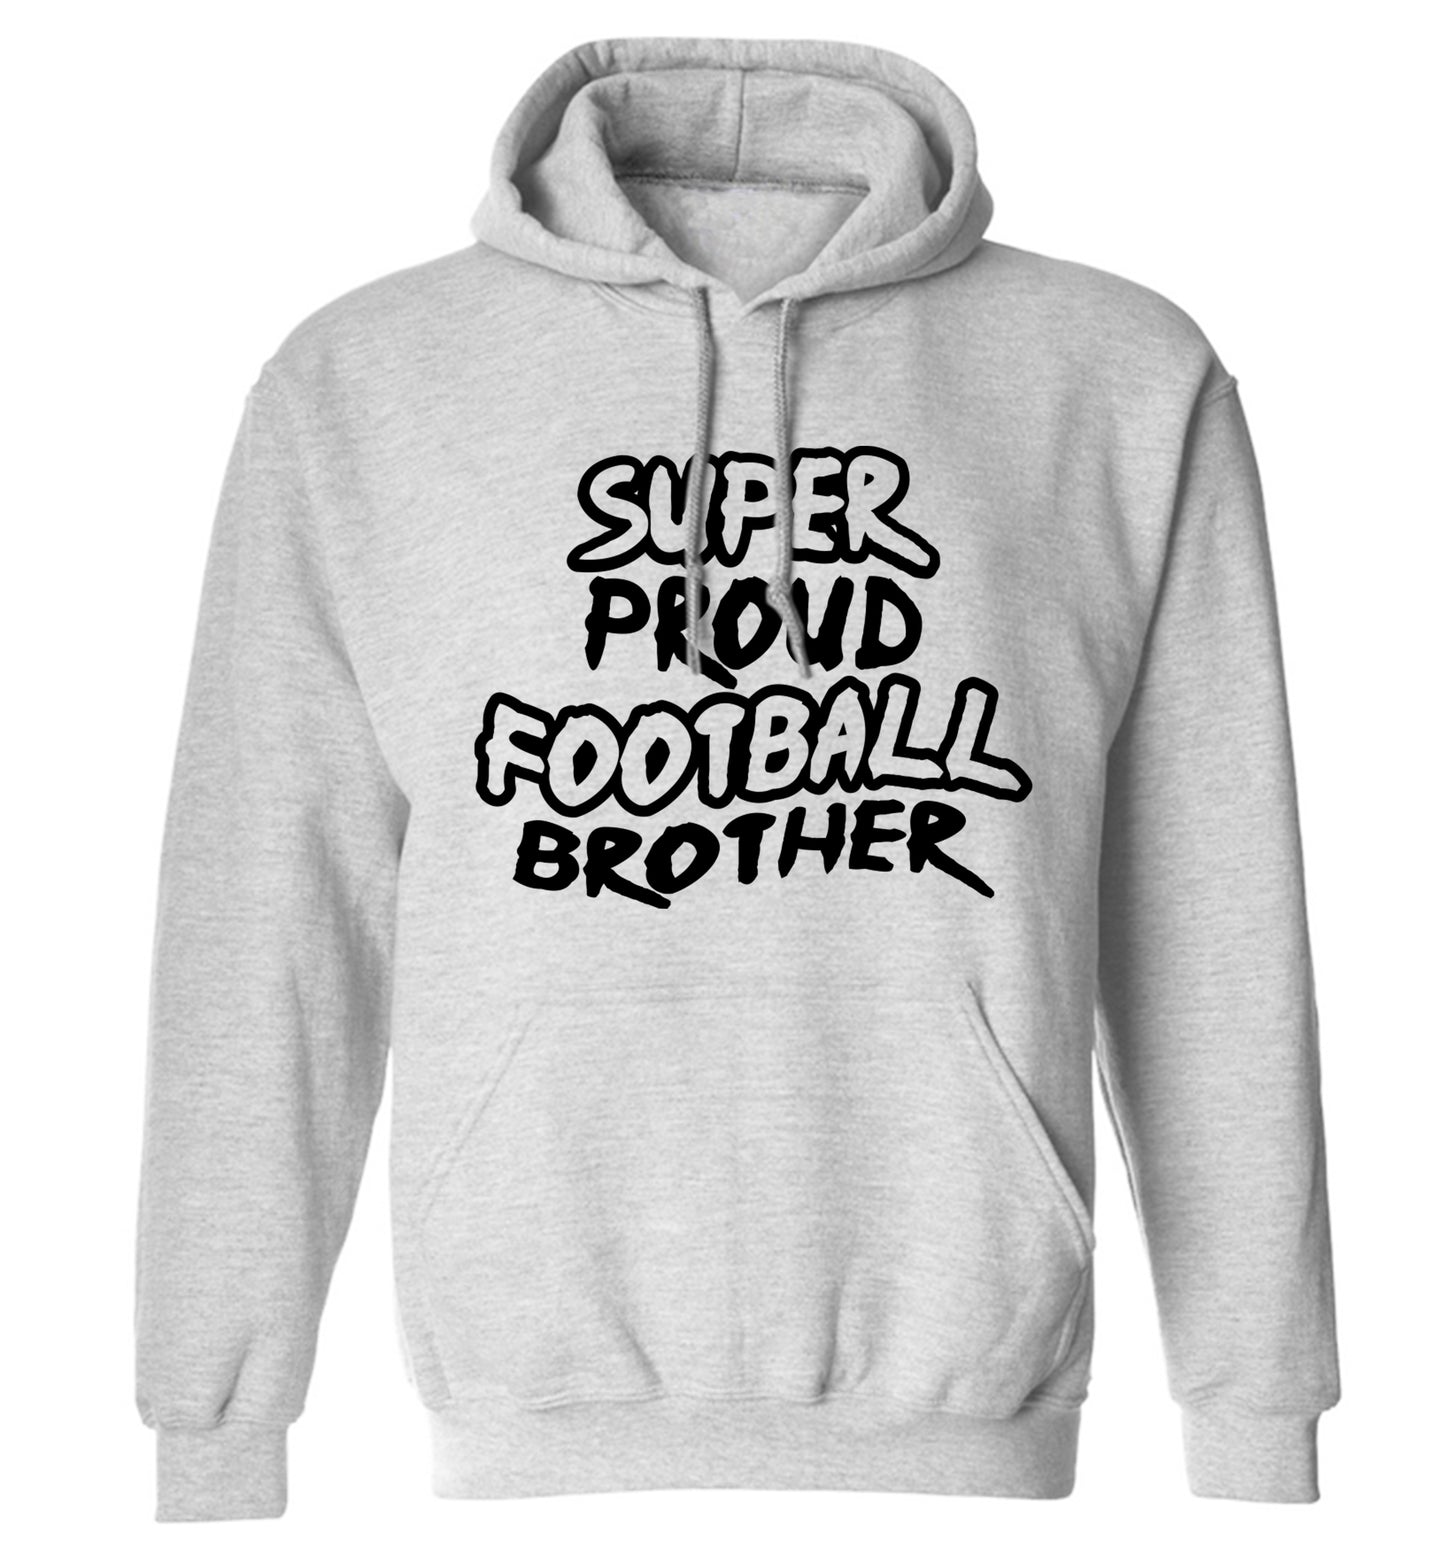 Super proud football brother adults unisexgrey hoodie 2XL